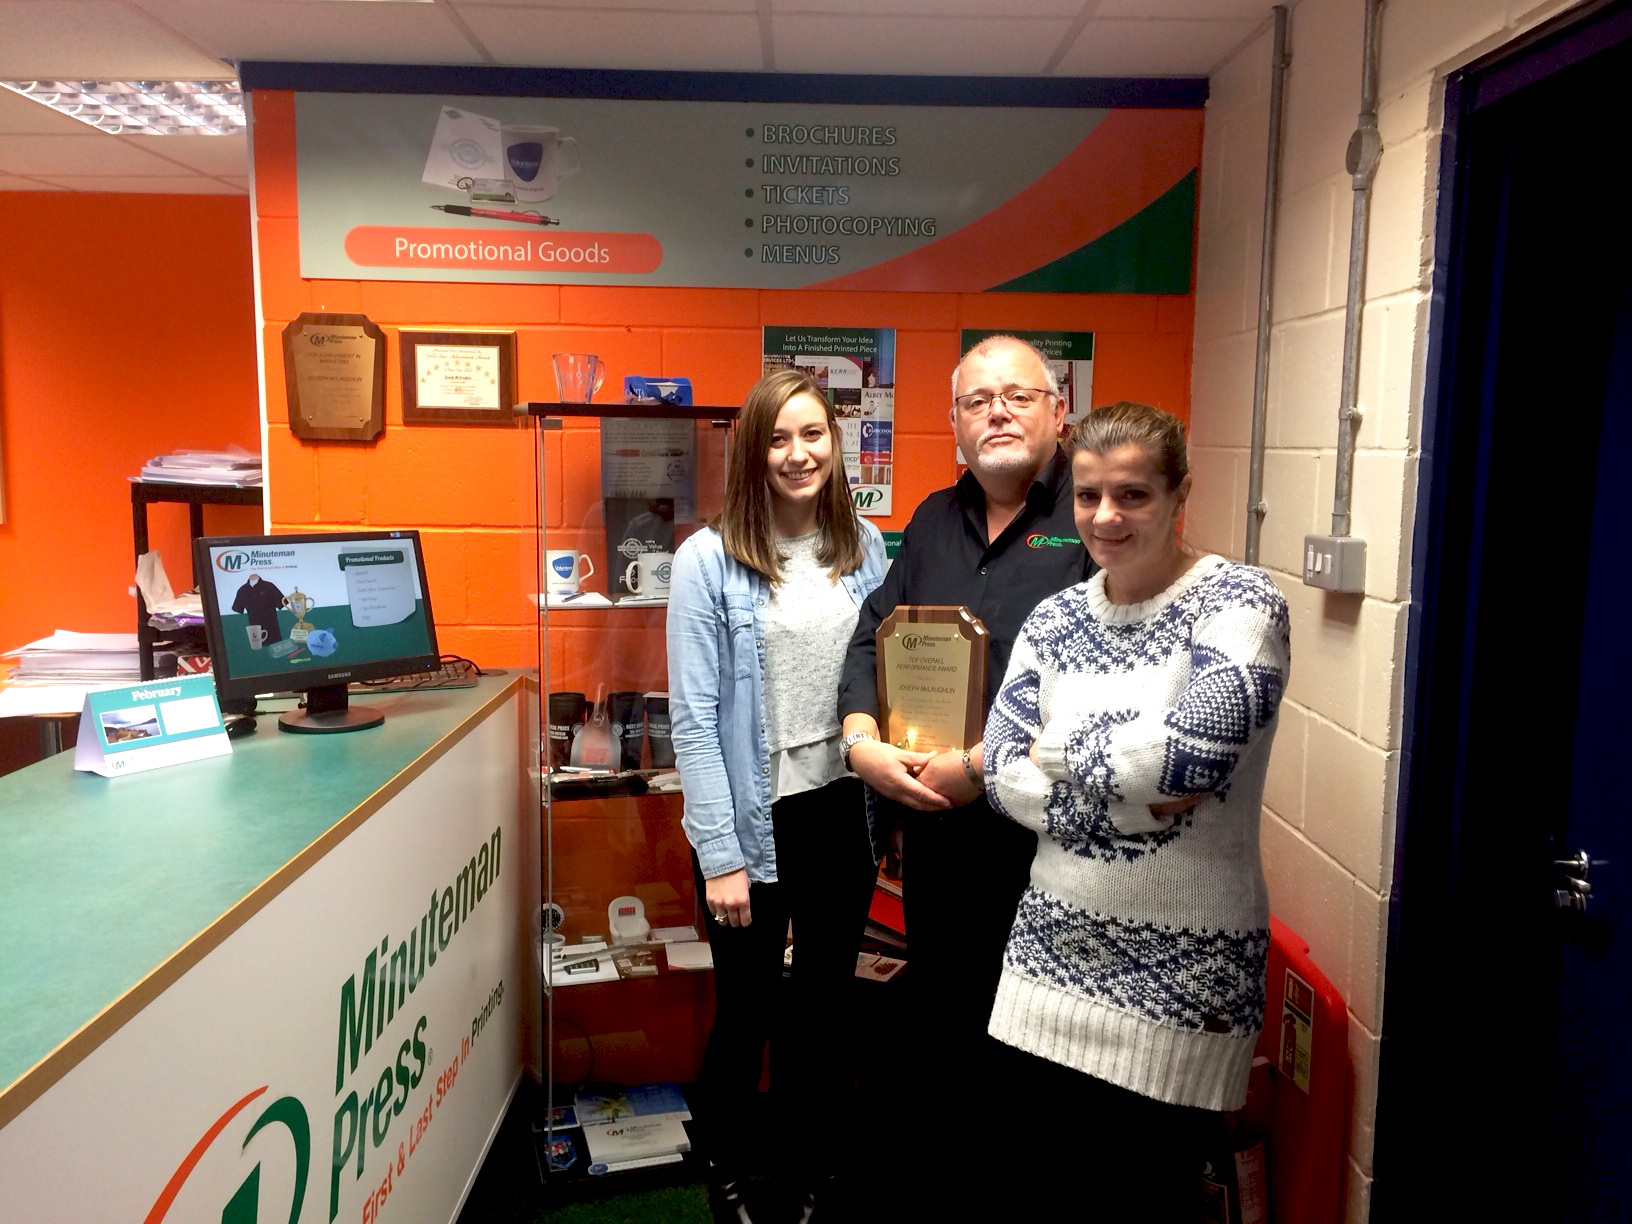 Minuteman Press franchise owner Joe McLaughlin (middle) along with his wife Florina (right) and graphic designer Samantha (left)